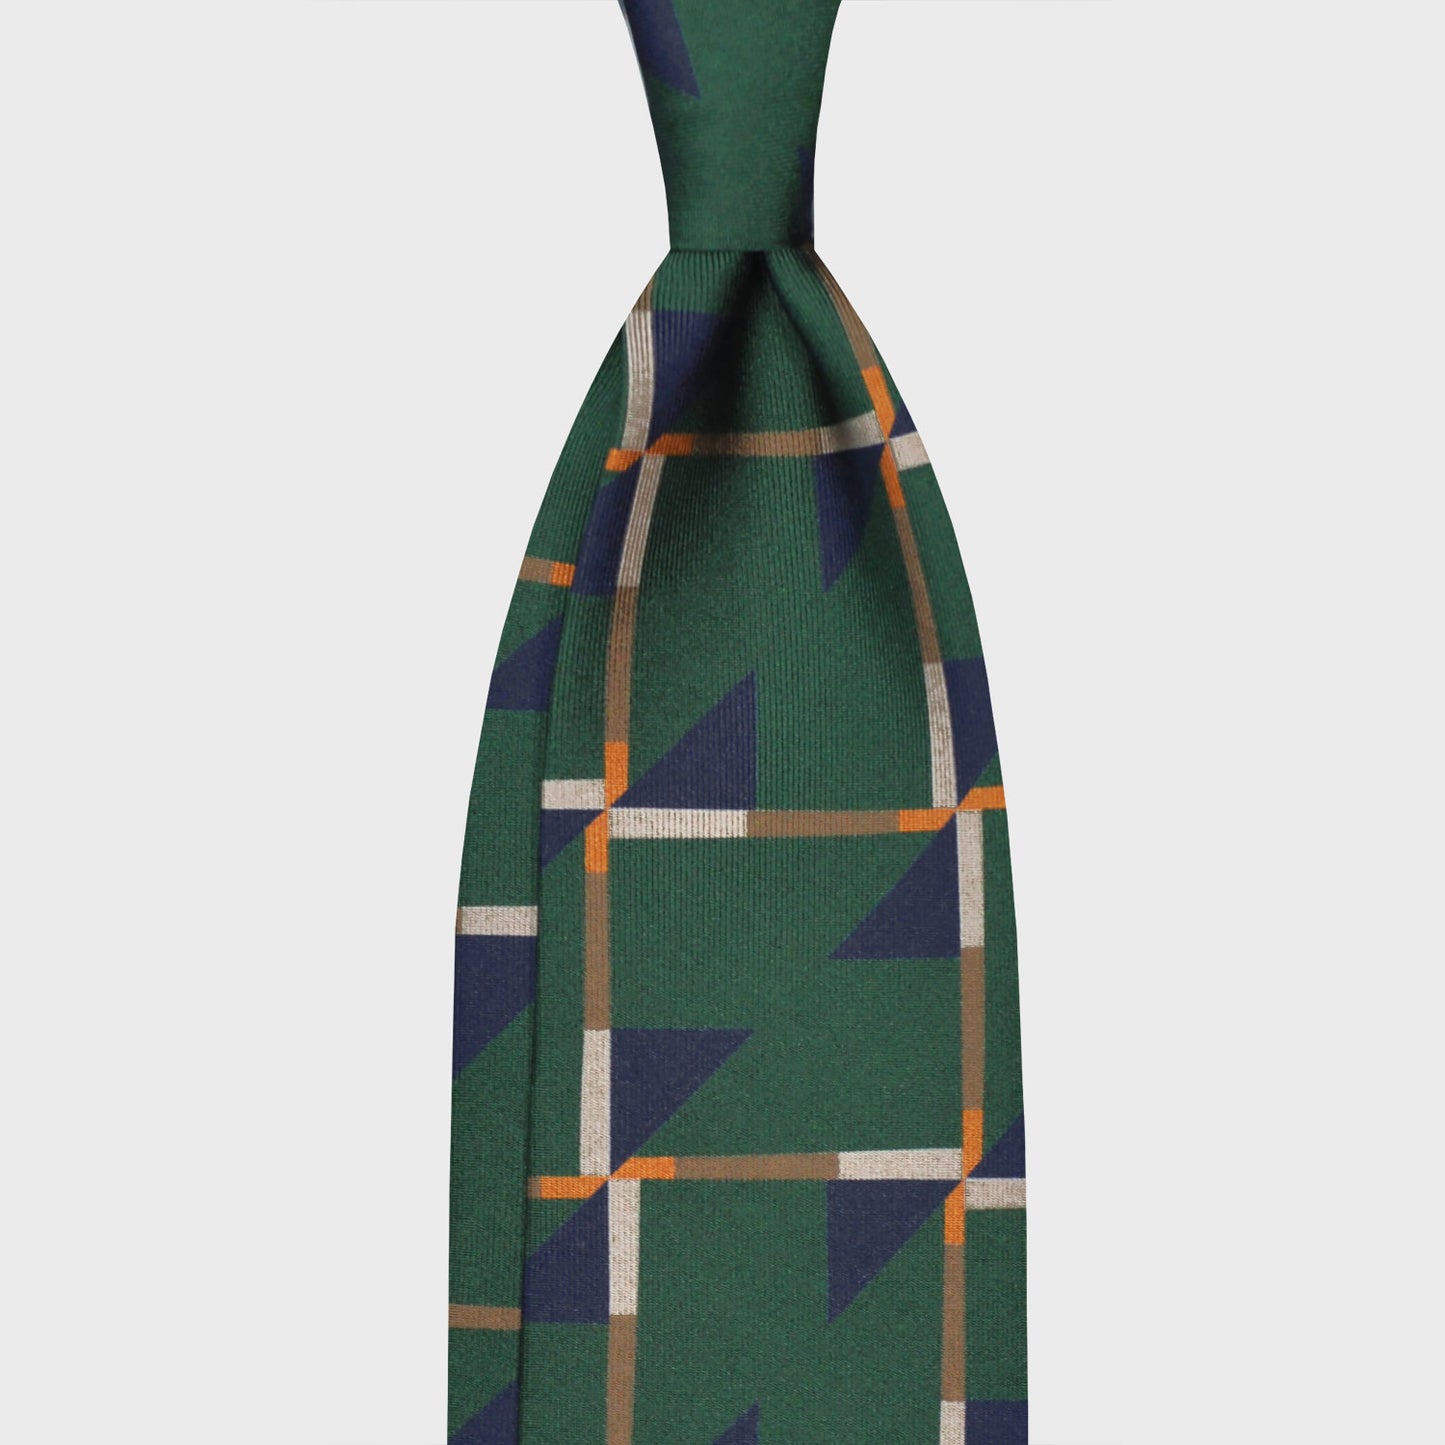 Grass Green Art Decò Pattern Silk Tie. Refined deco tie made with finest Italian silk soft to the touch, grass green background with cobalt blue and beige Art Decò pattern, unlined tie 3 folds, this Art Deco ties is made with a exclusive pattern made by Wools Boutique Uomo